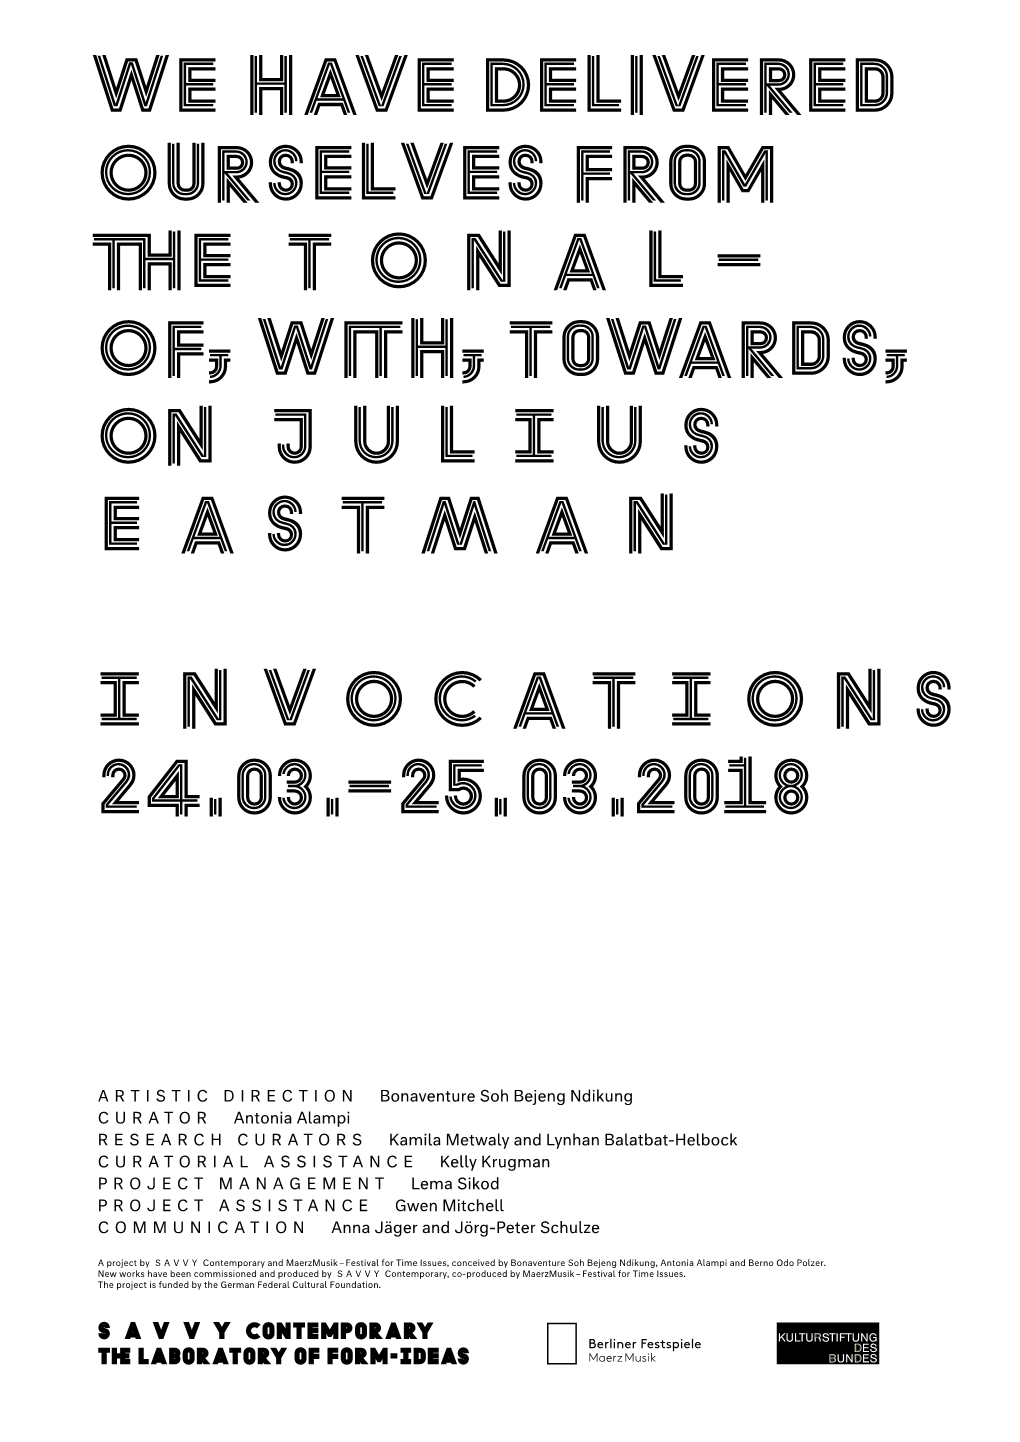 Of, With, Towards, on JULIUS EASTMAN INVOCATIONS 24.03